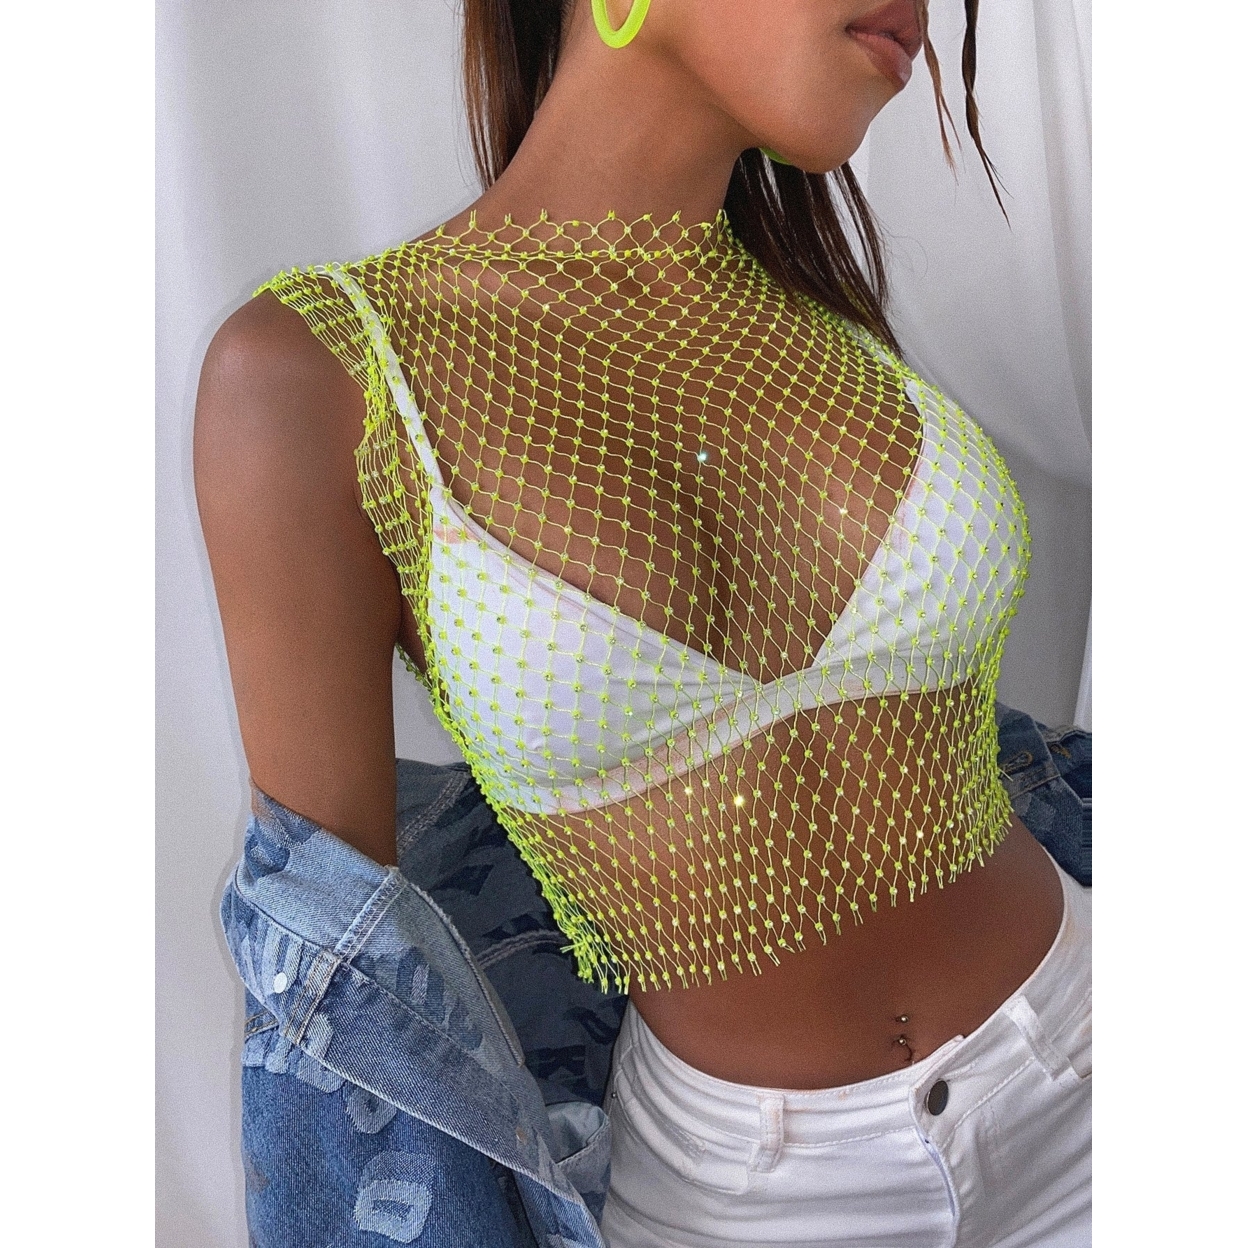 Rhinestone Detail Fishnet Top Without Bra - Lime Green, L